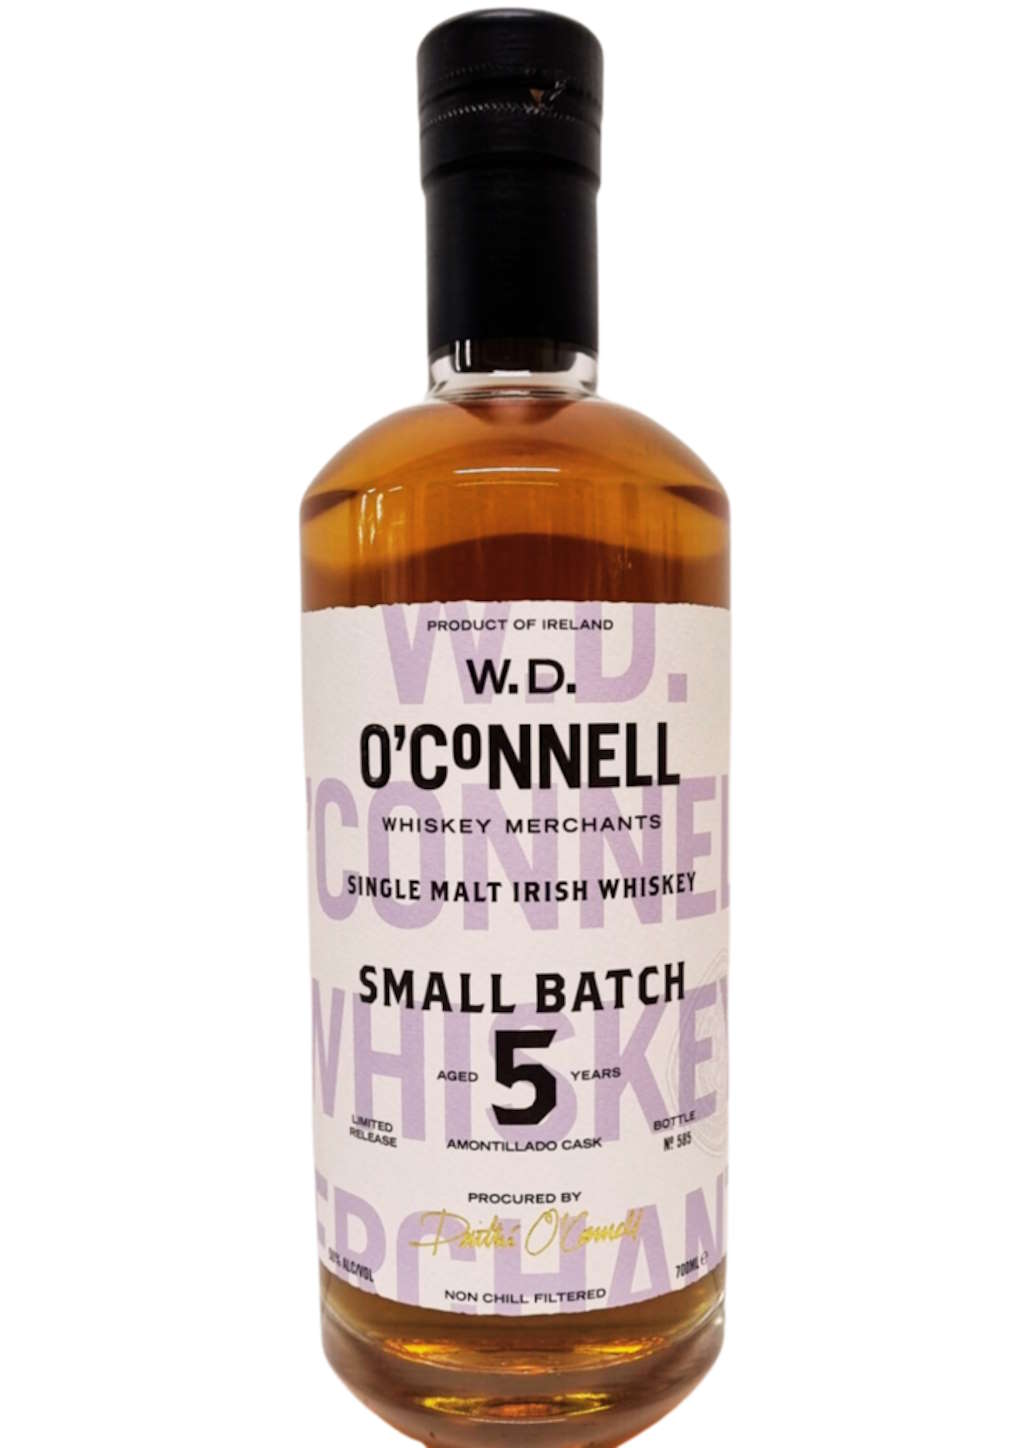 W.D. O'Connell 5 Jahre Amontillado Sherry Cask Whiskey